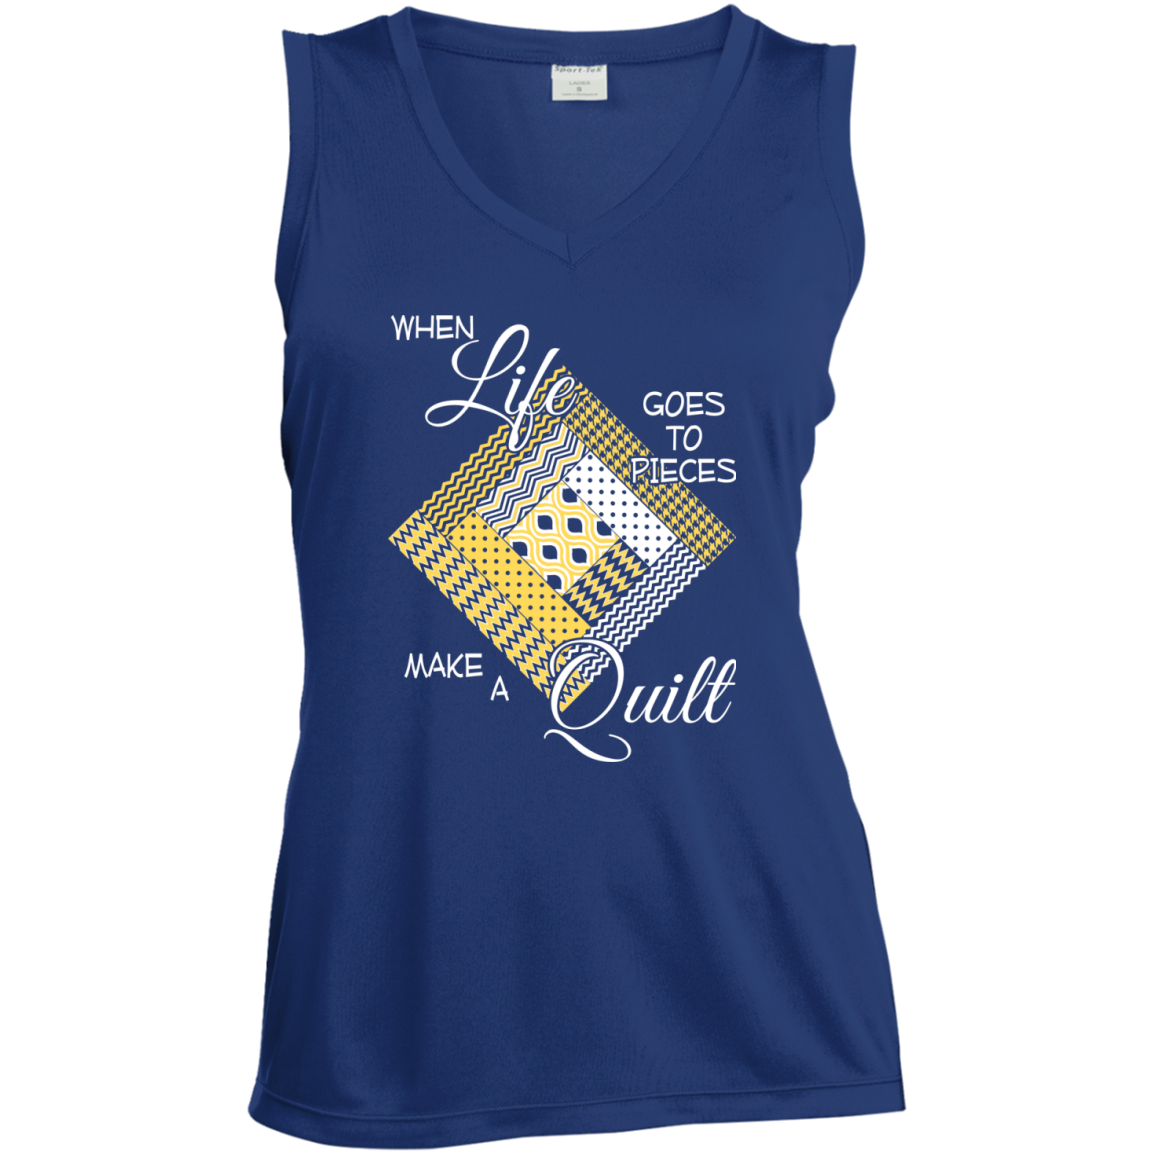 Make a Quilt (yellow) Ladies Sleeveless V-Neck - Crafter4Life - 5